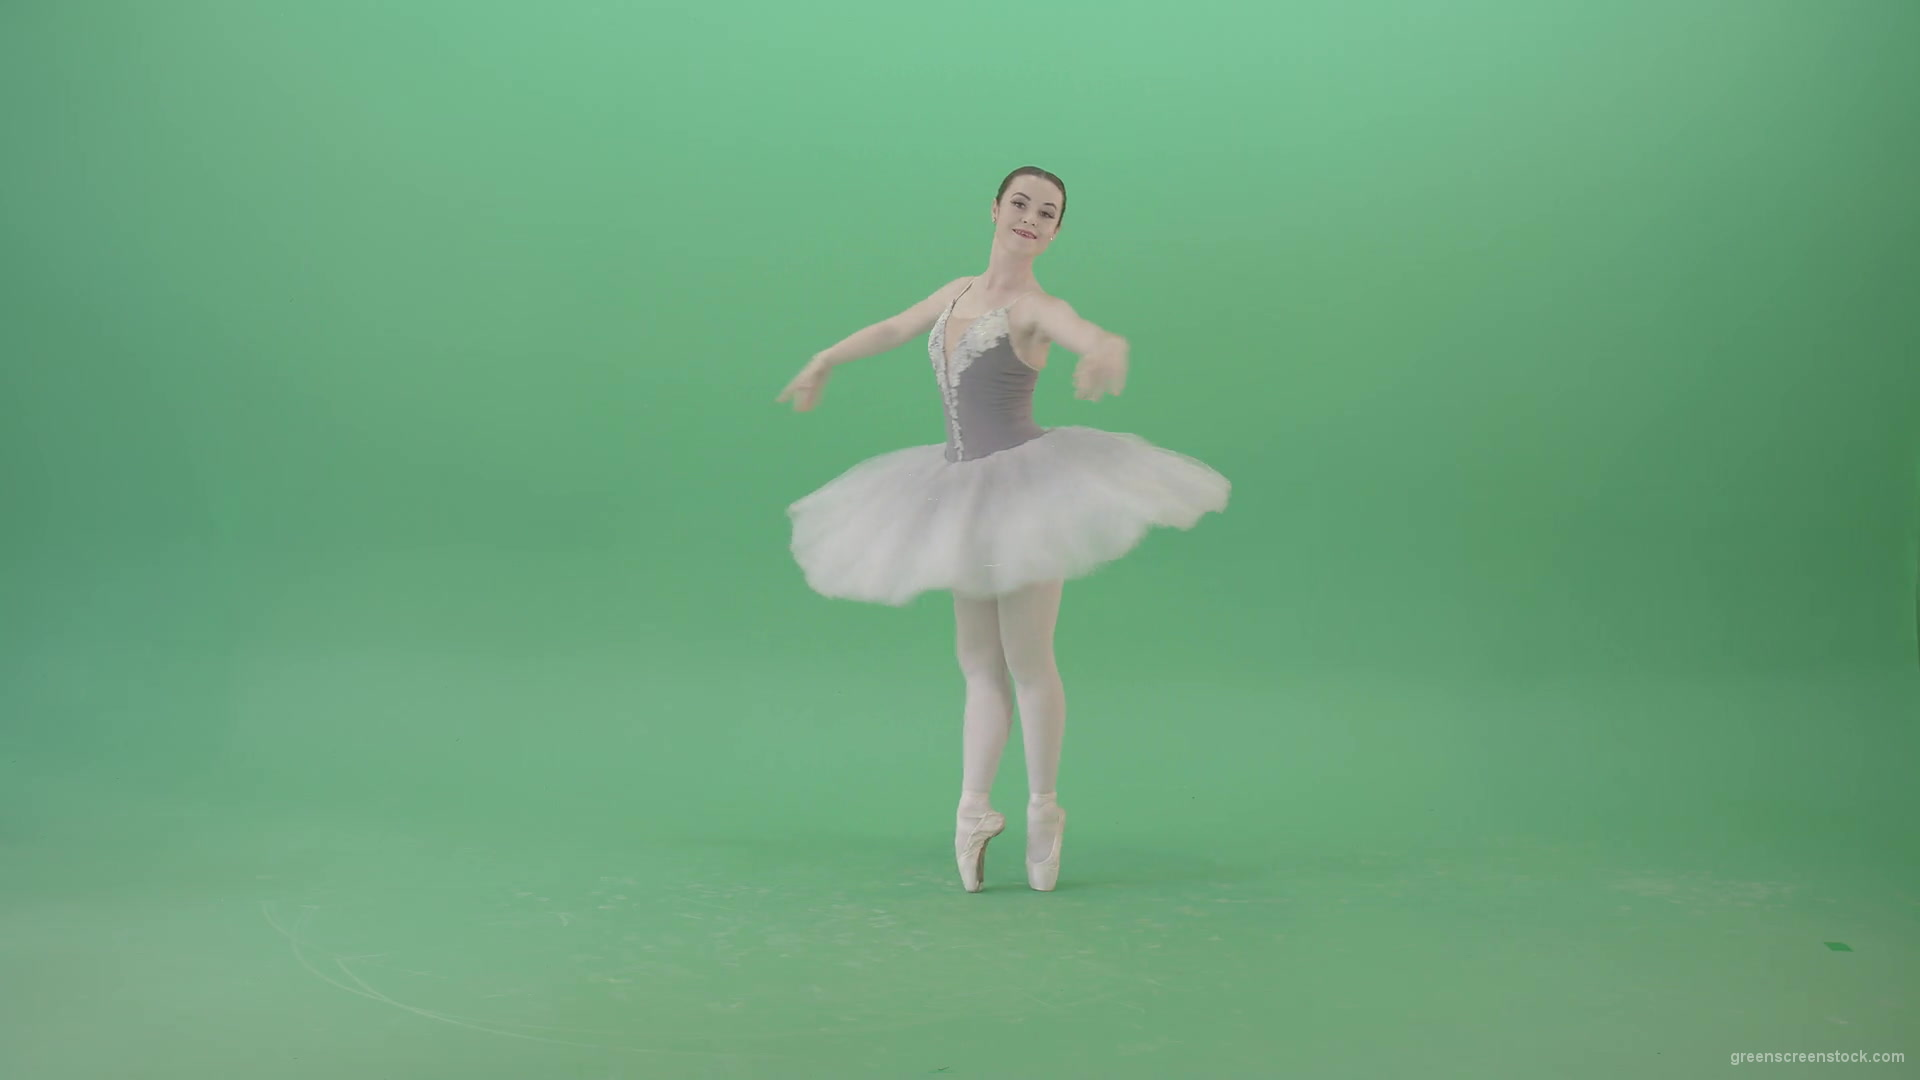 Smal-ballerina-girl-spinning-on-the-place-in-ballet-dance-art-on-green-screen-4K-Video-Footage-1920_004 Green Screen Stock